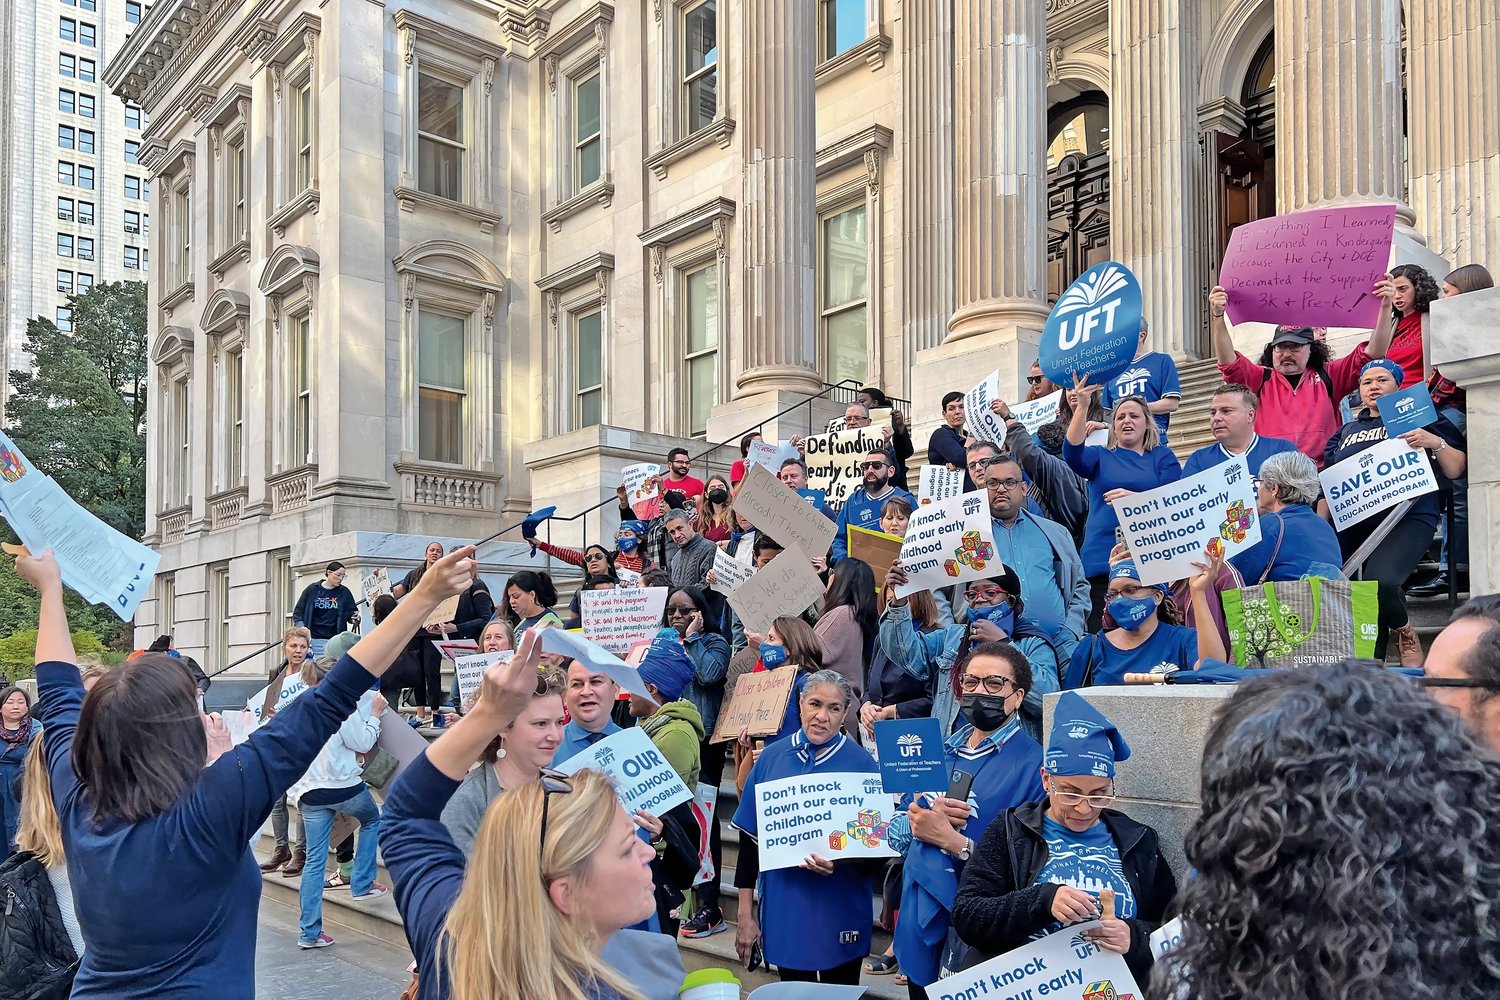 Social workers, advisement coordinators, parents and other educators gathered together at a rally on Nov. 4 outside the education department headquarters at the Tweed Courthouse in Manhattan.